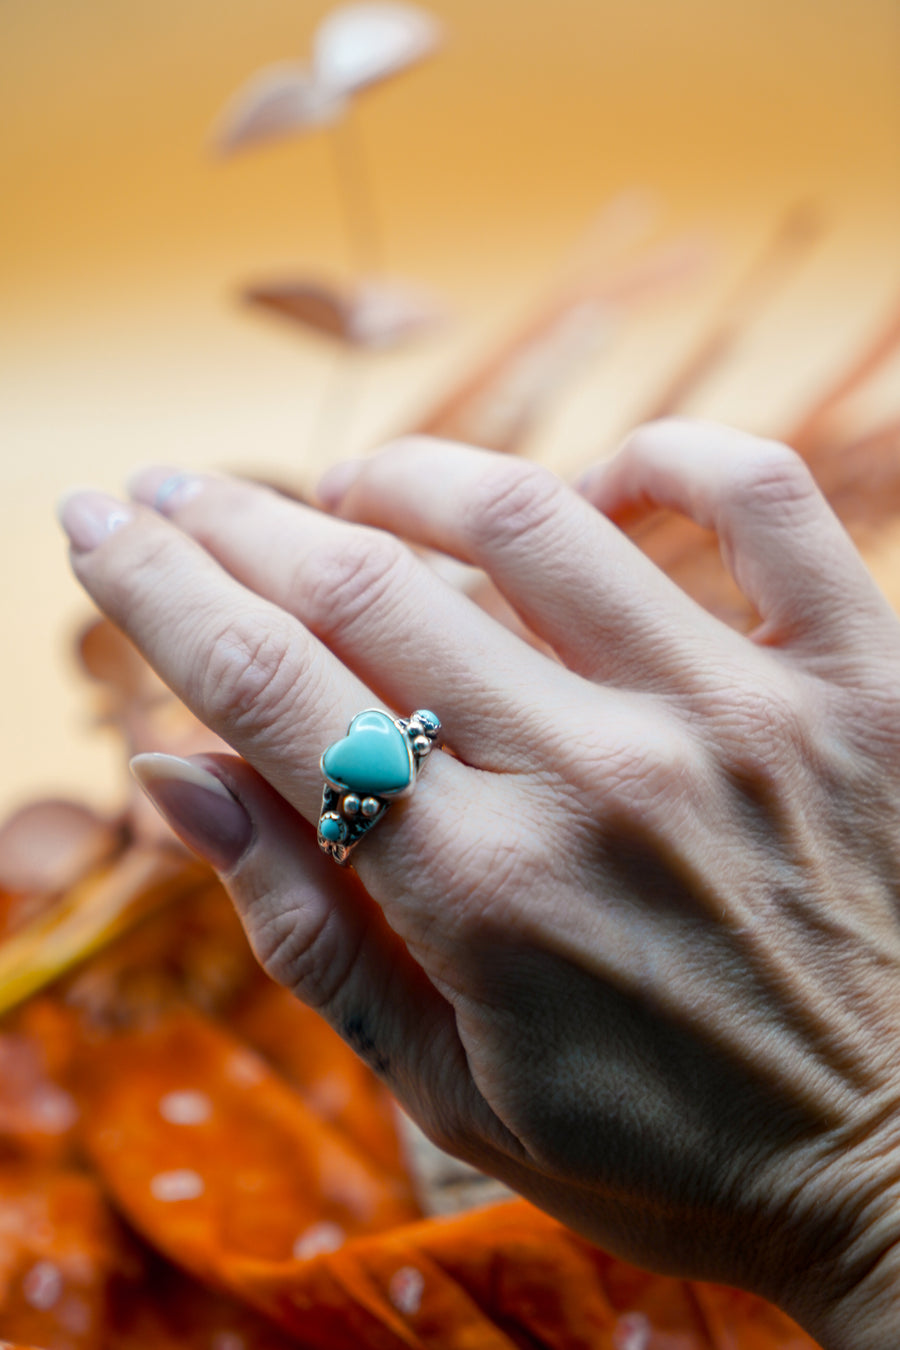 The Turquoise Lover's Ring in Campitos & Carico Lake Turquoise (Size 9.5)